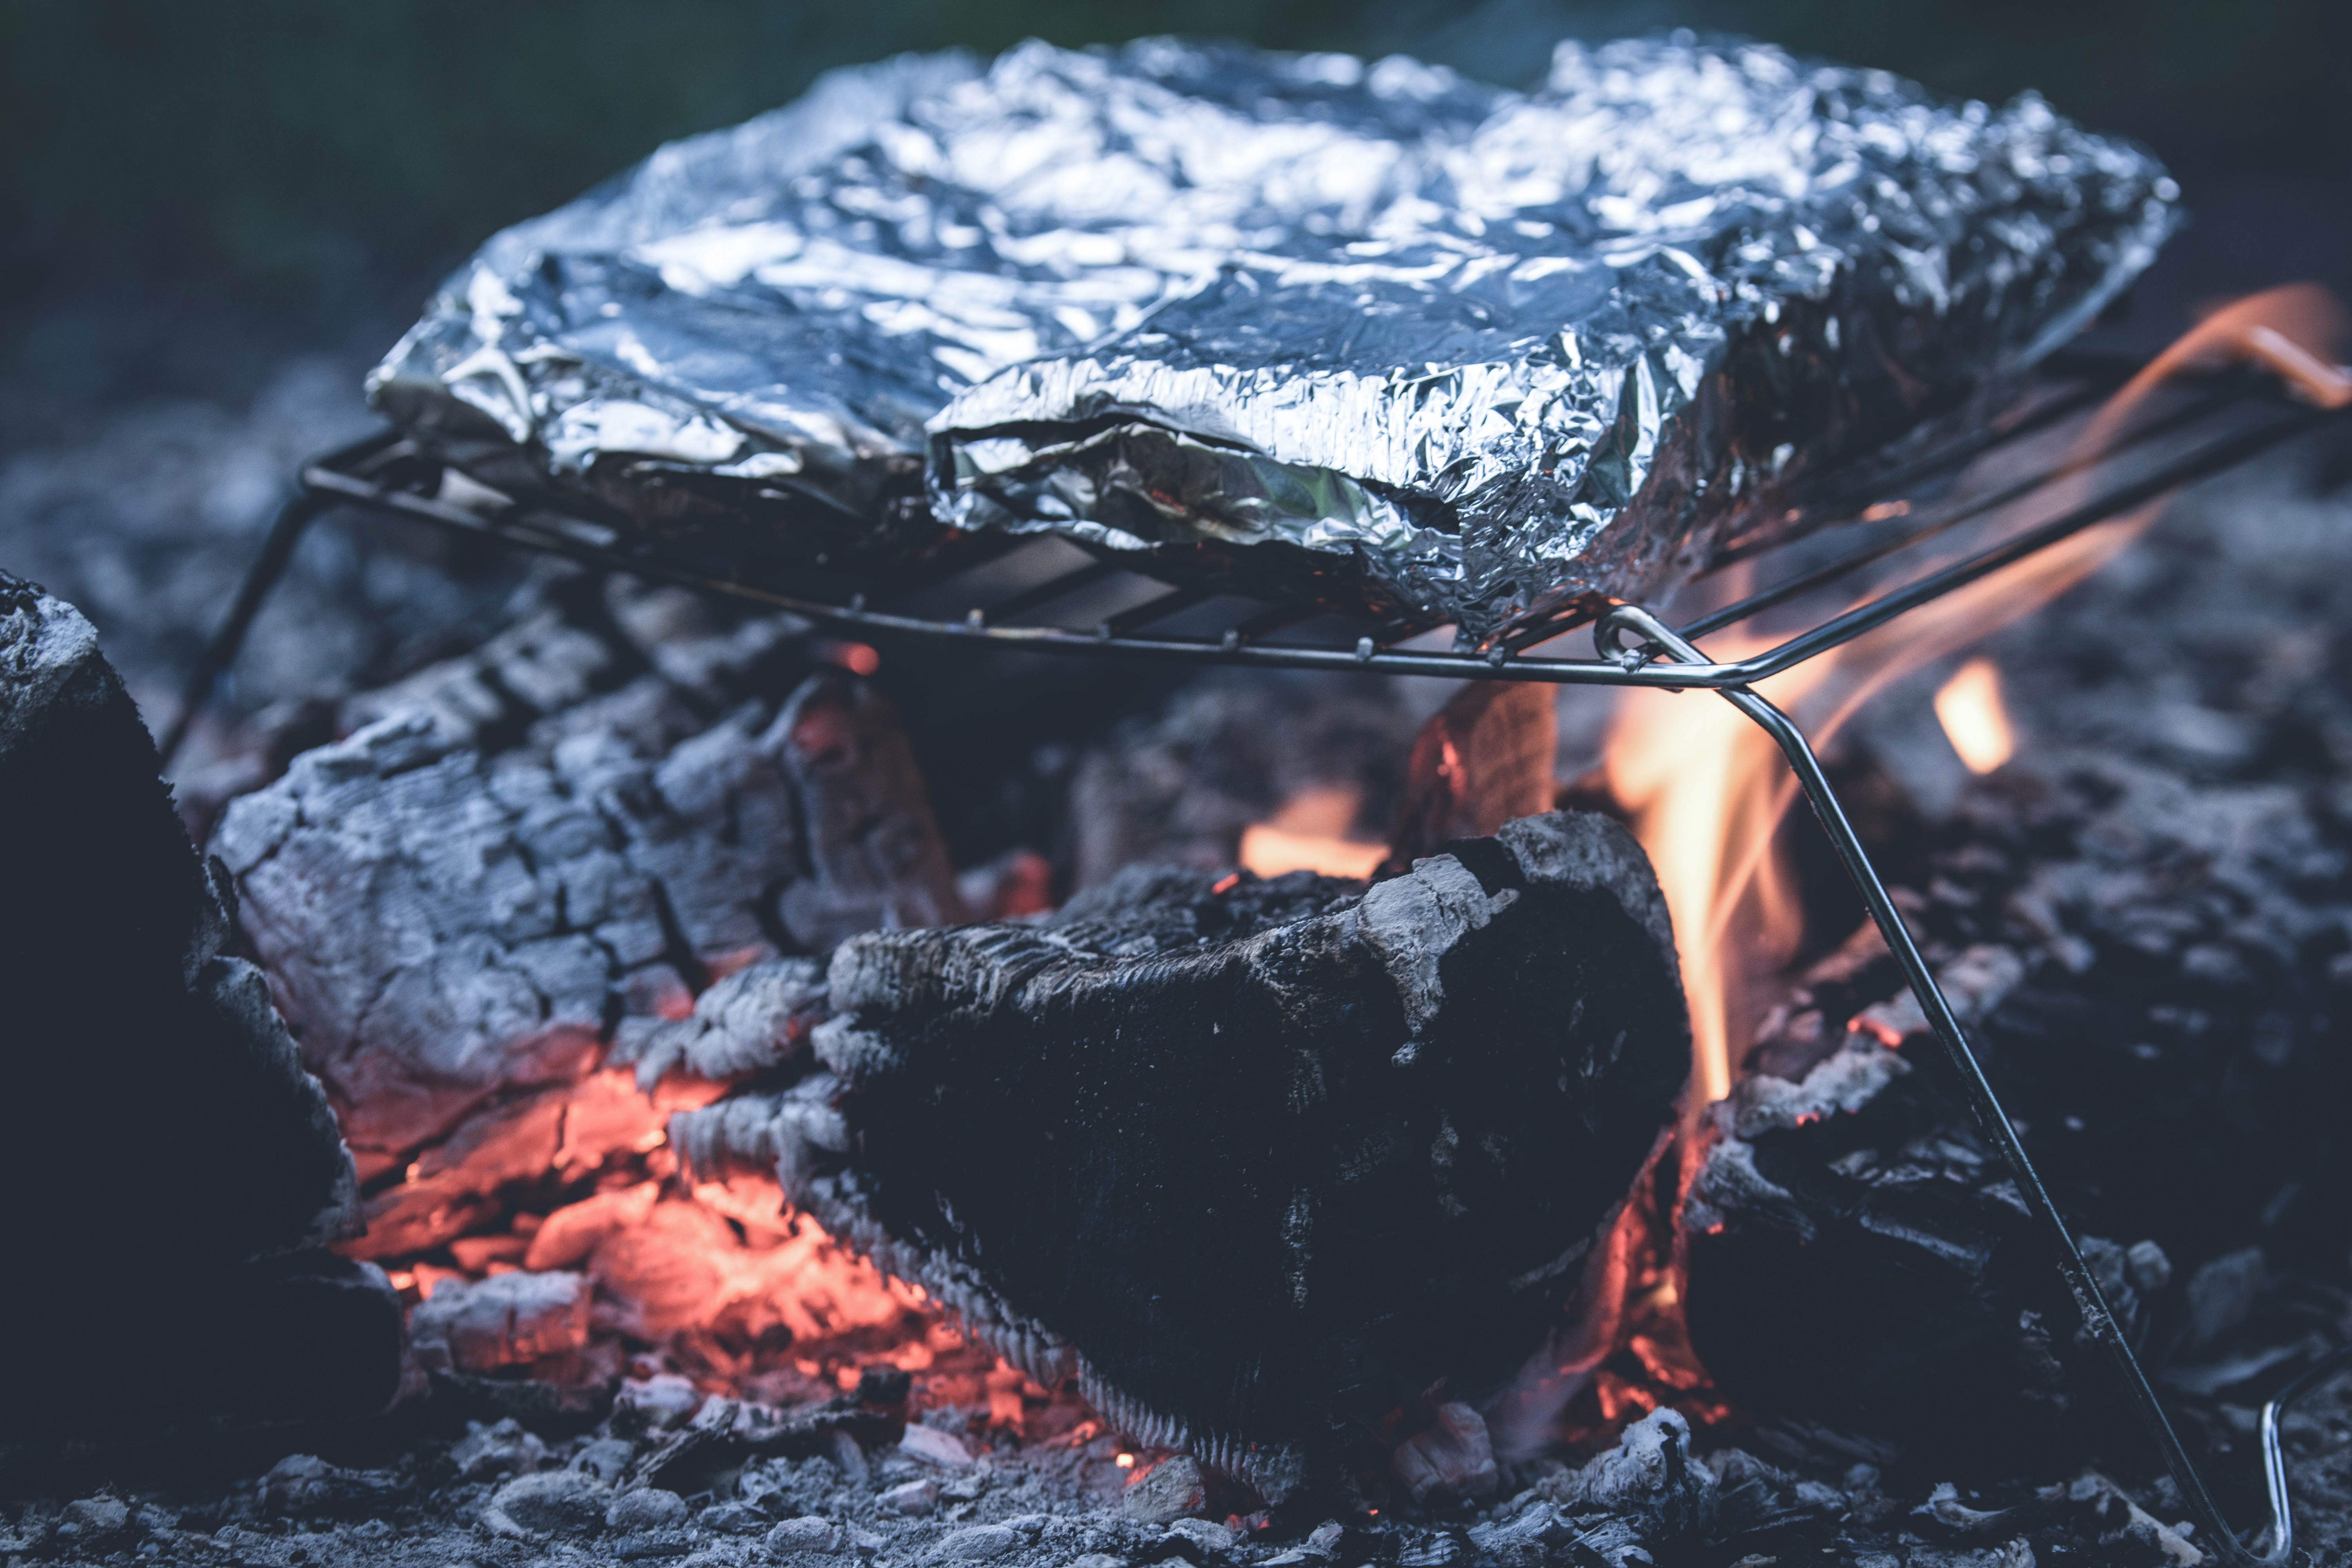 foil grill on charcoal